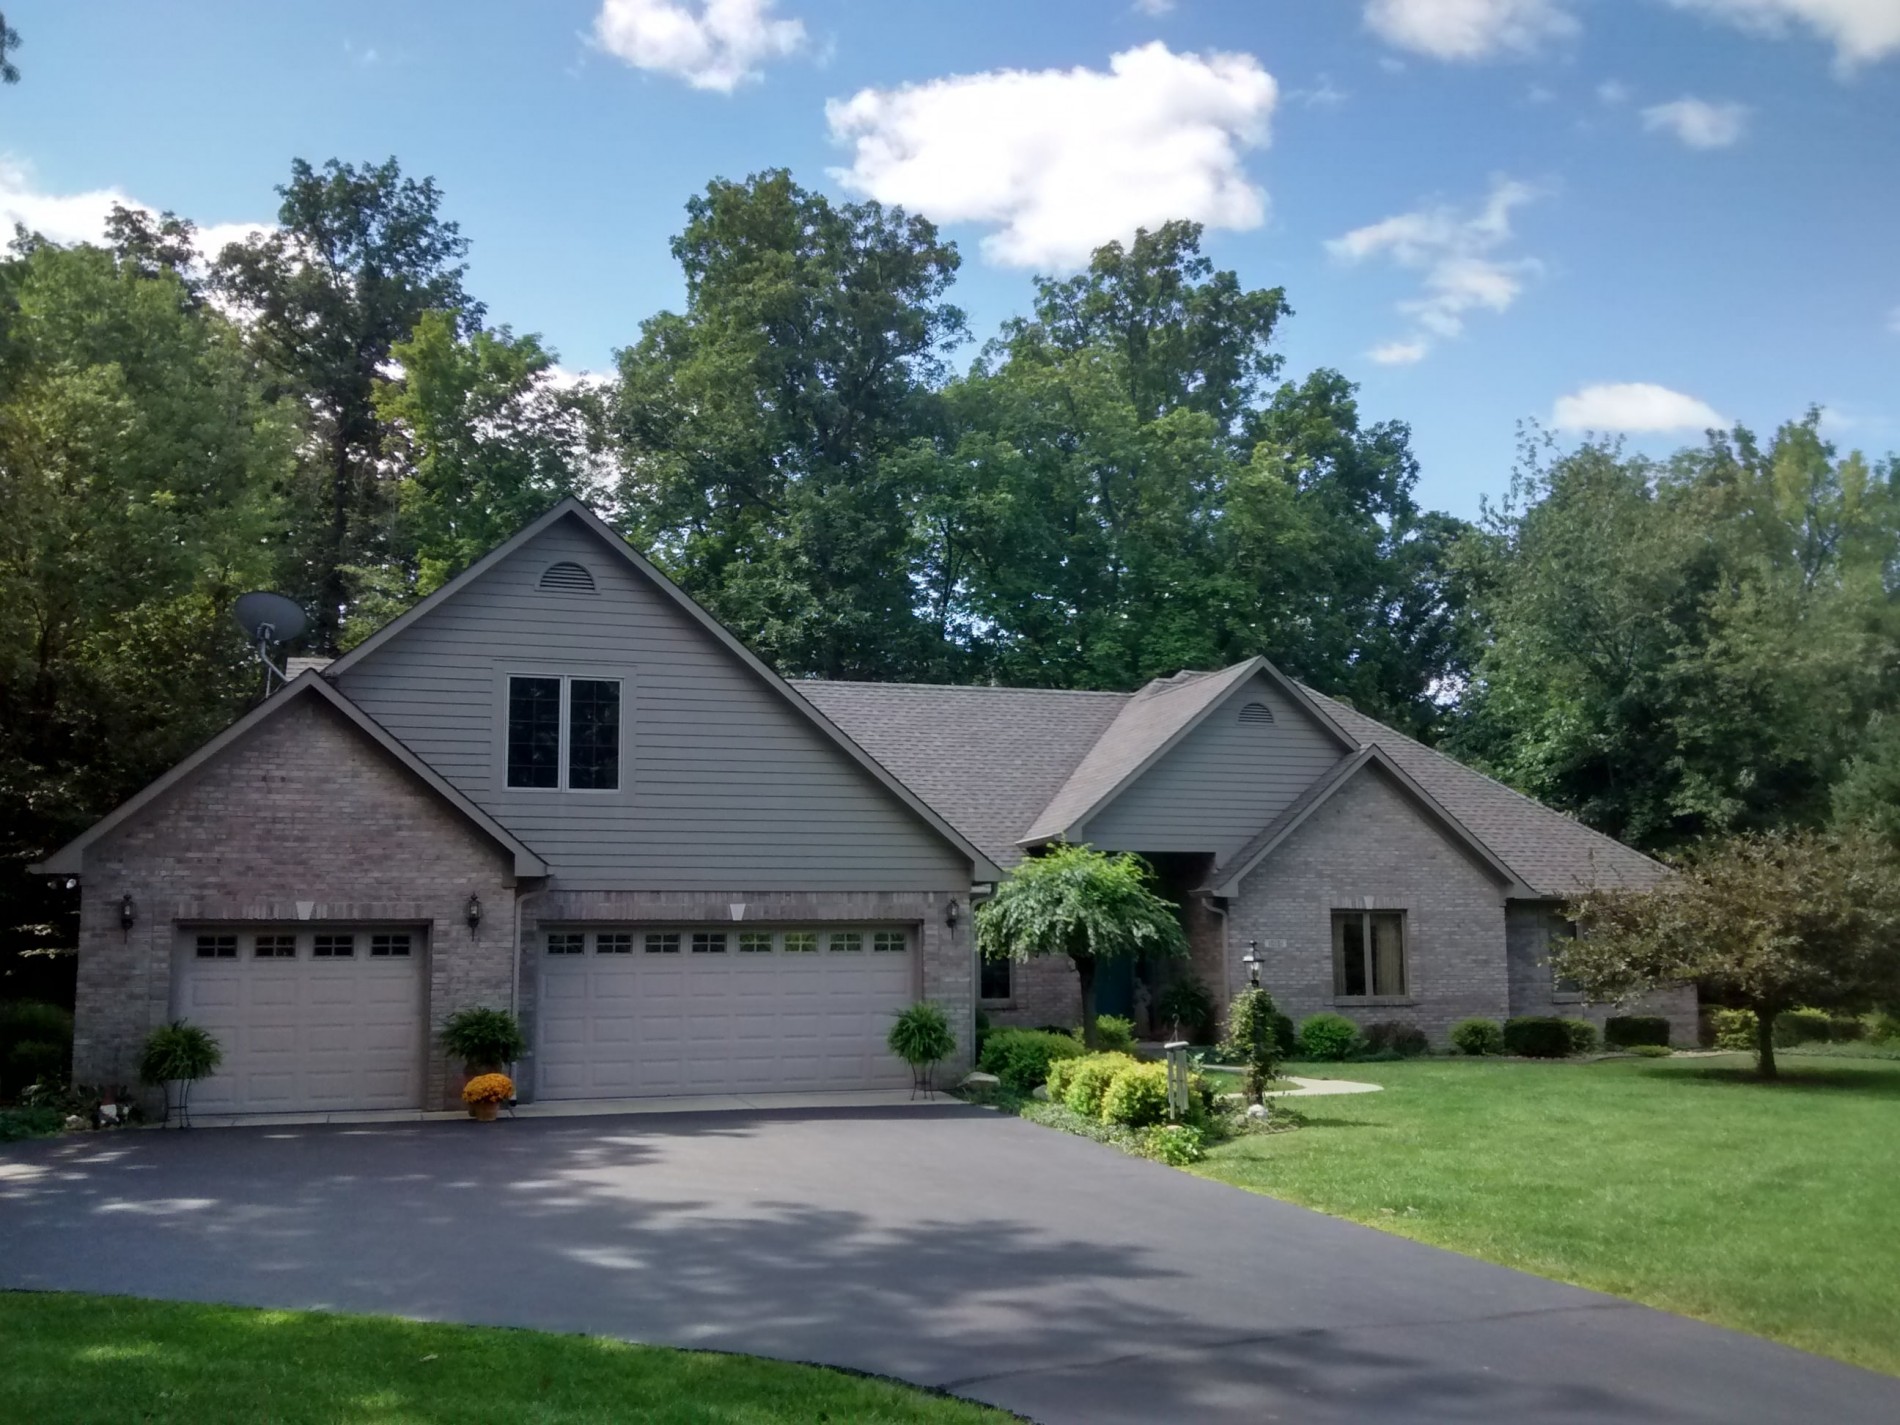 Home siding installation, beautiful home restoration, roofing, gutters and remodeling by Finney and Sons Construction